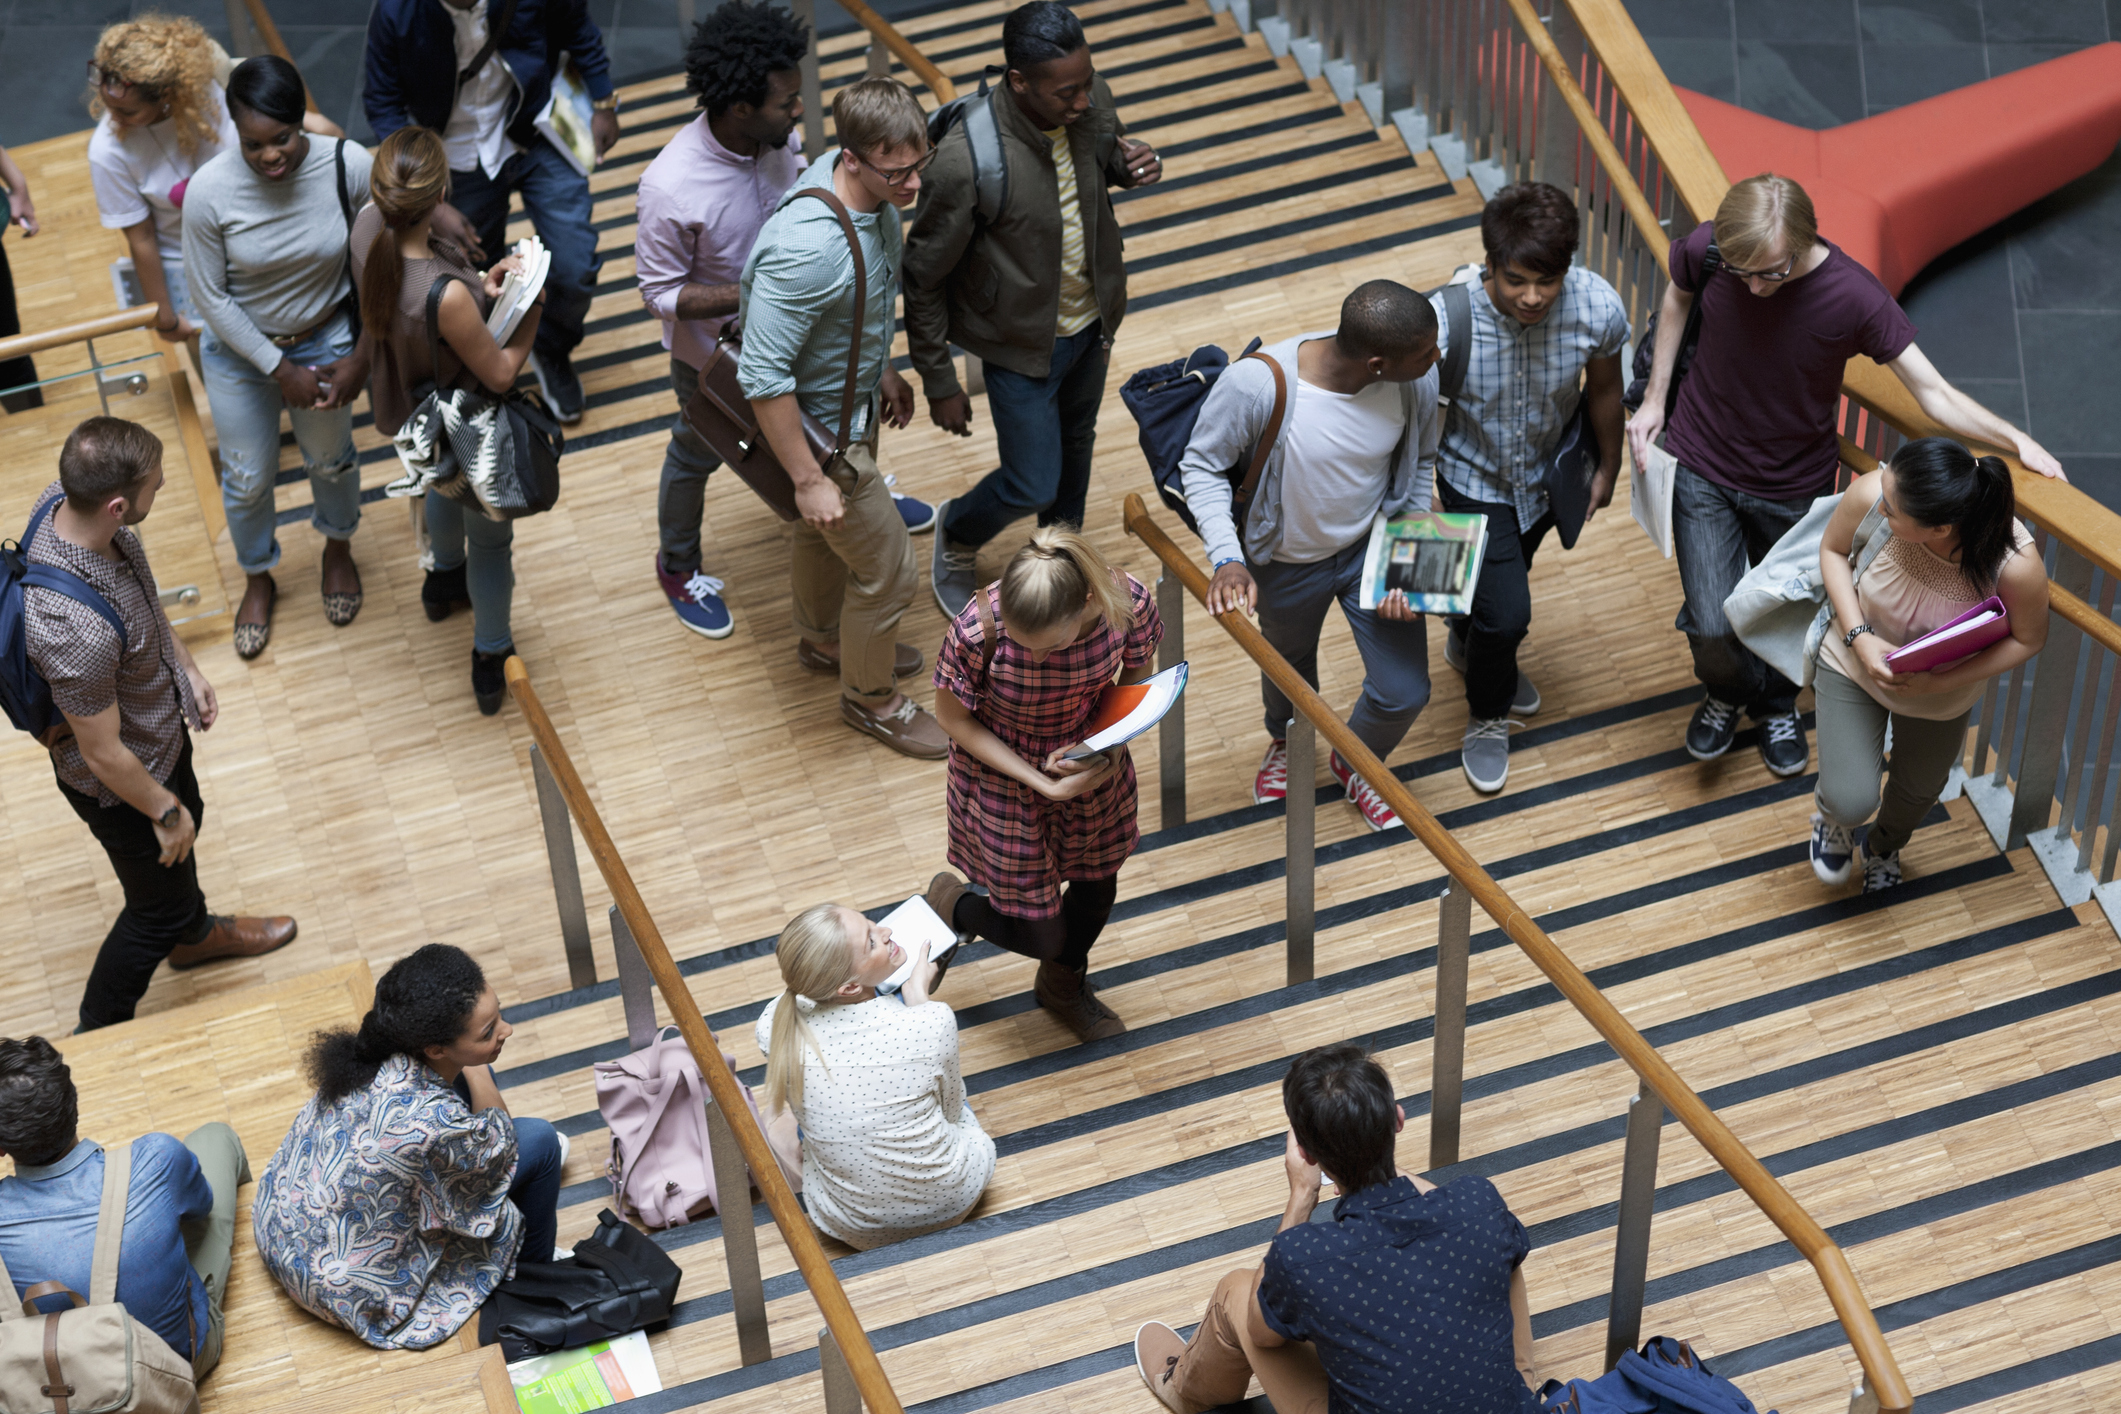 University students on a busy stairway. (Getty Images)